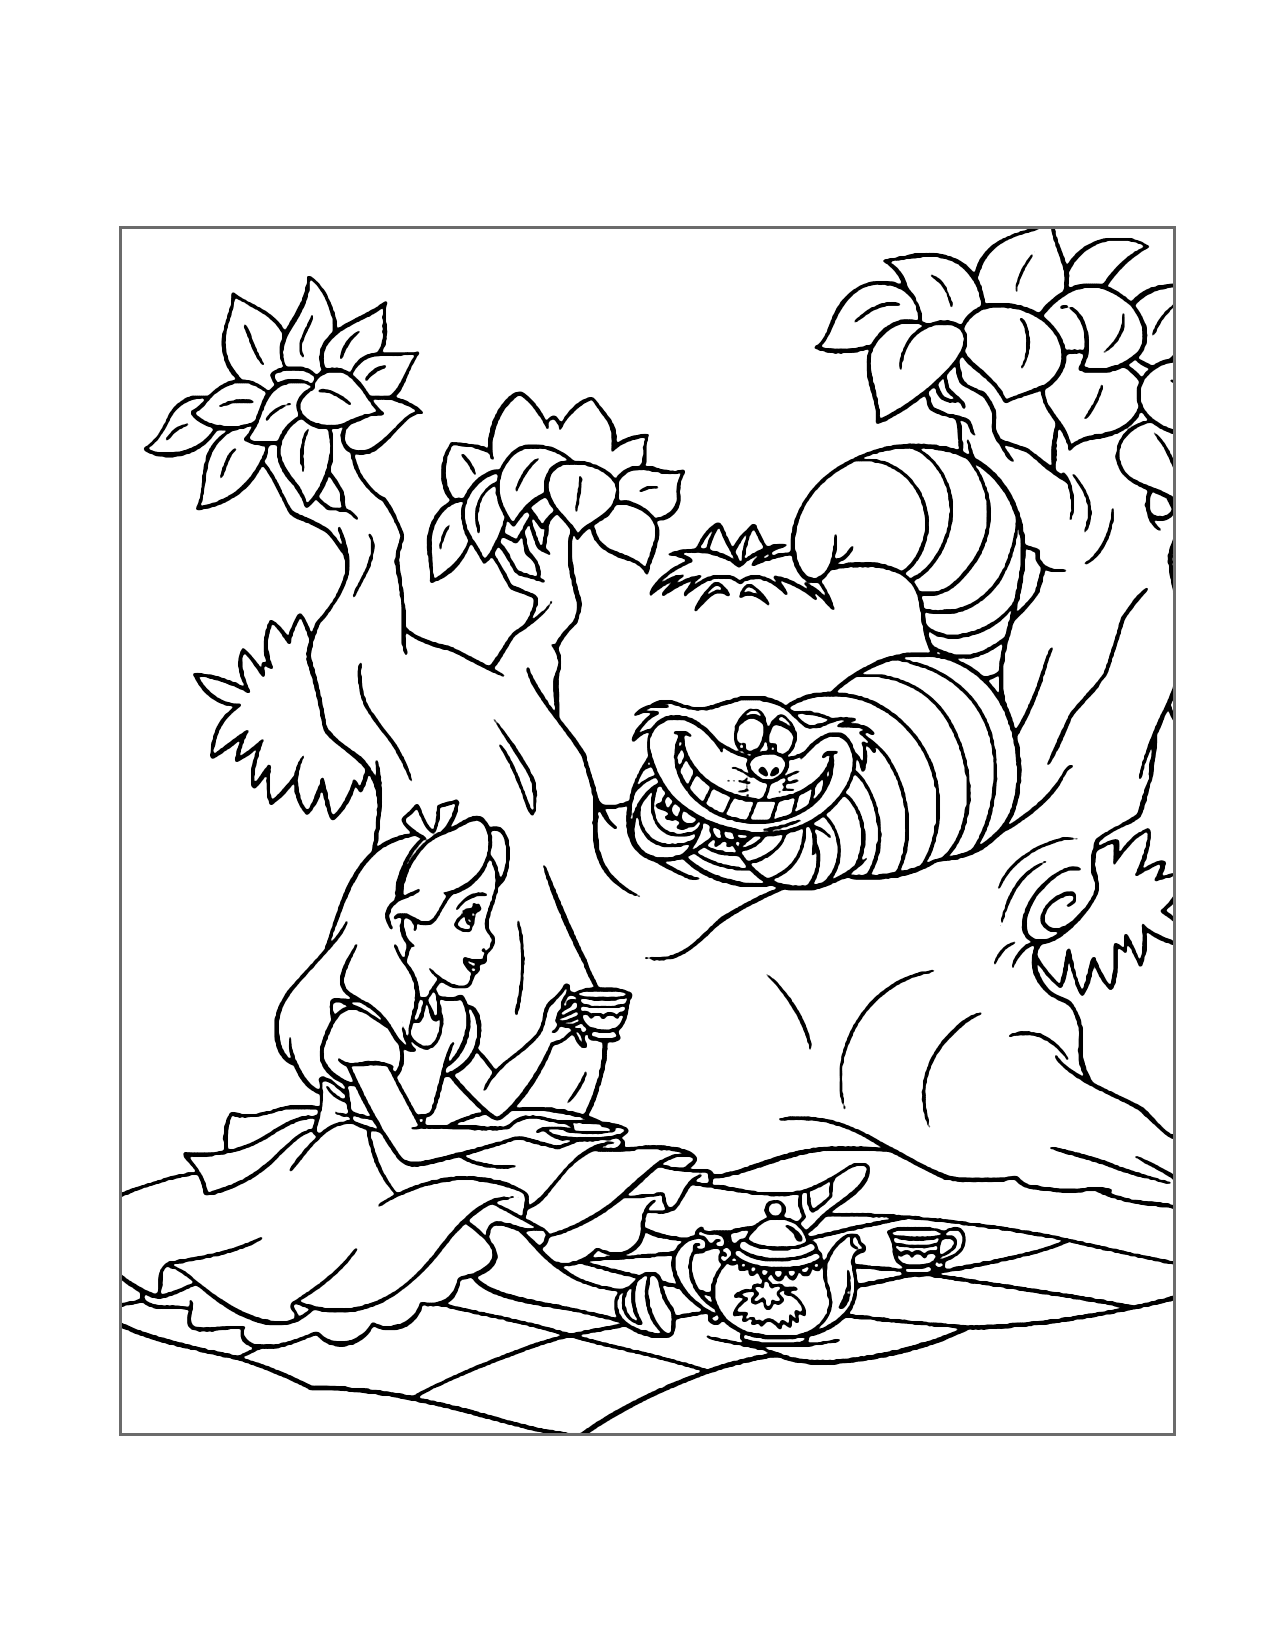 Alice And The Cheshire Cat Coloring Page